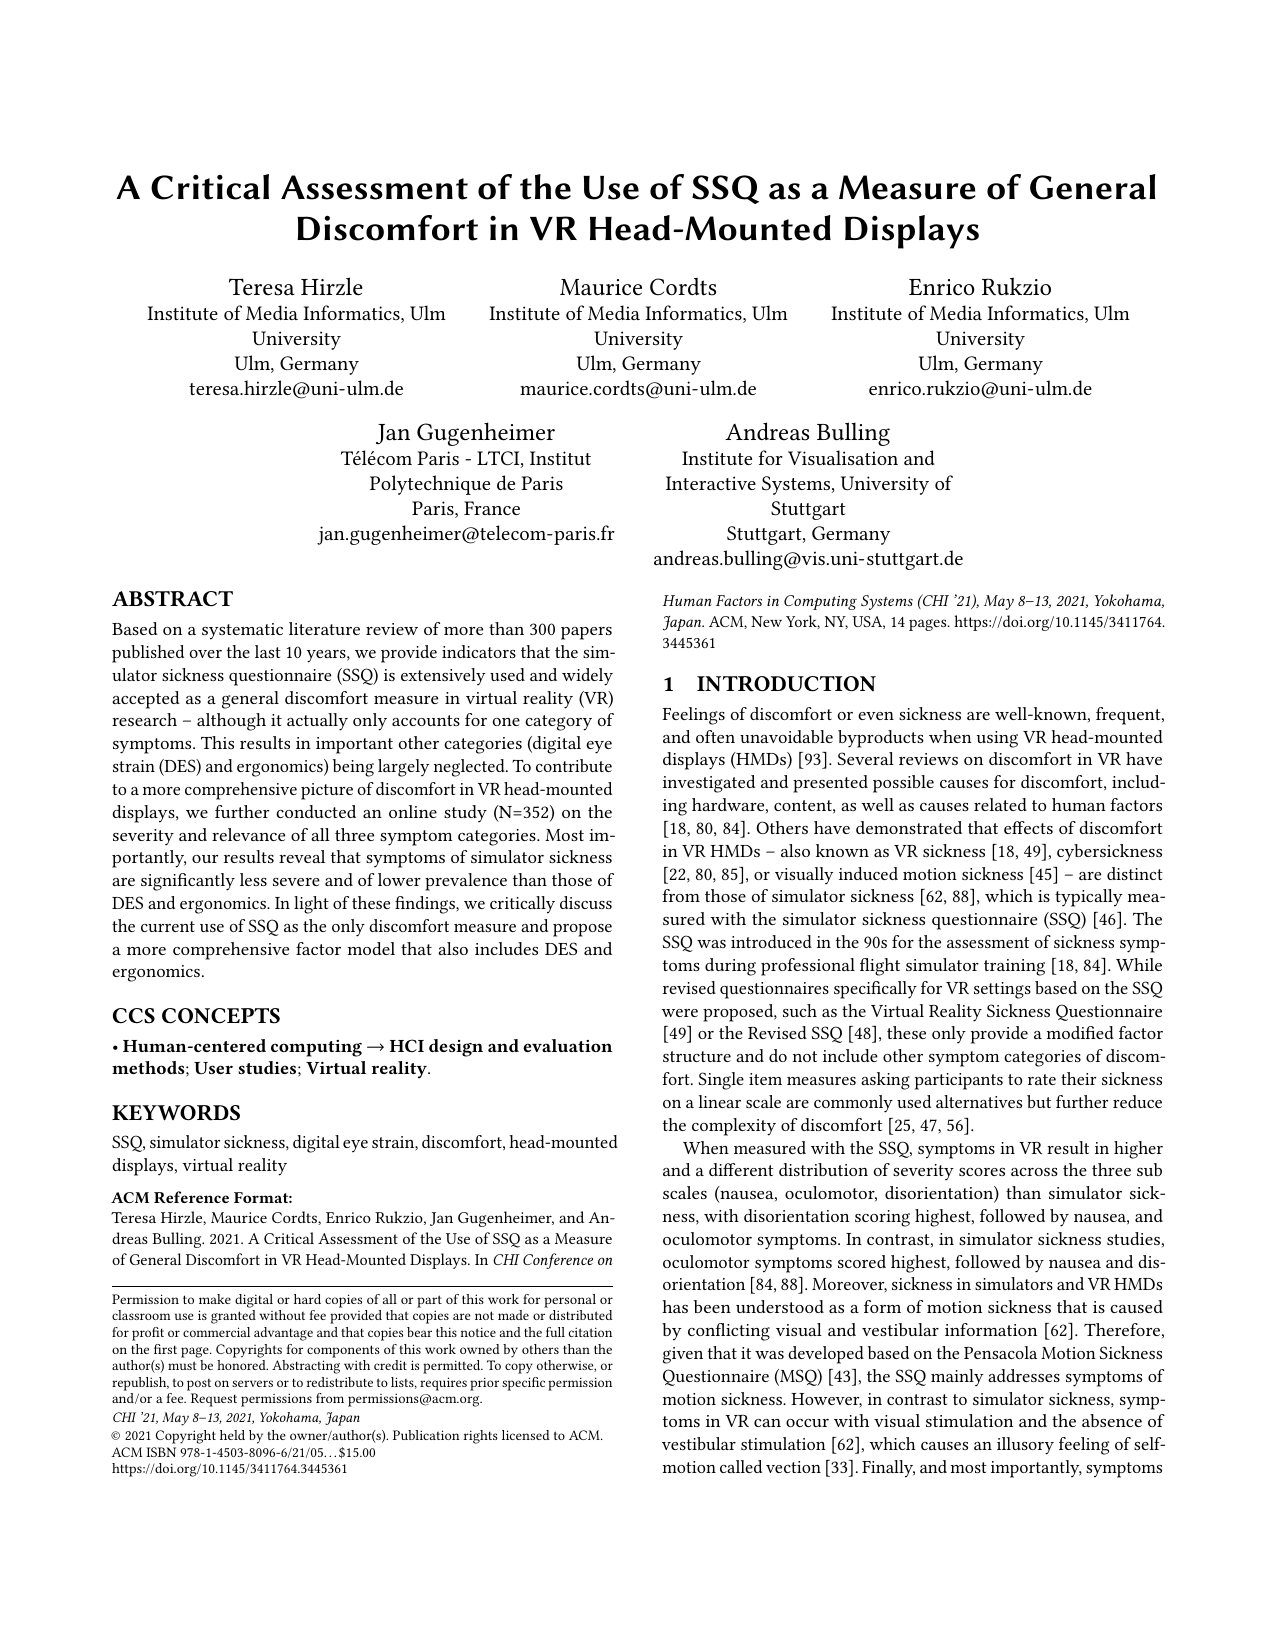 A Critical Assessment of the Use of SSQ as a Measure of General Discomfort in VR Head-Mounted Displays